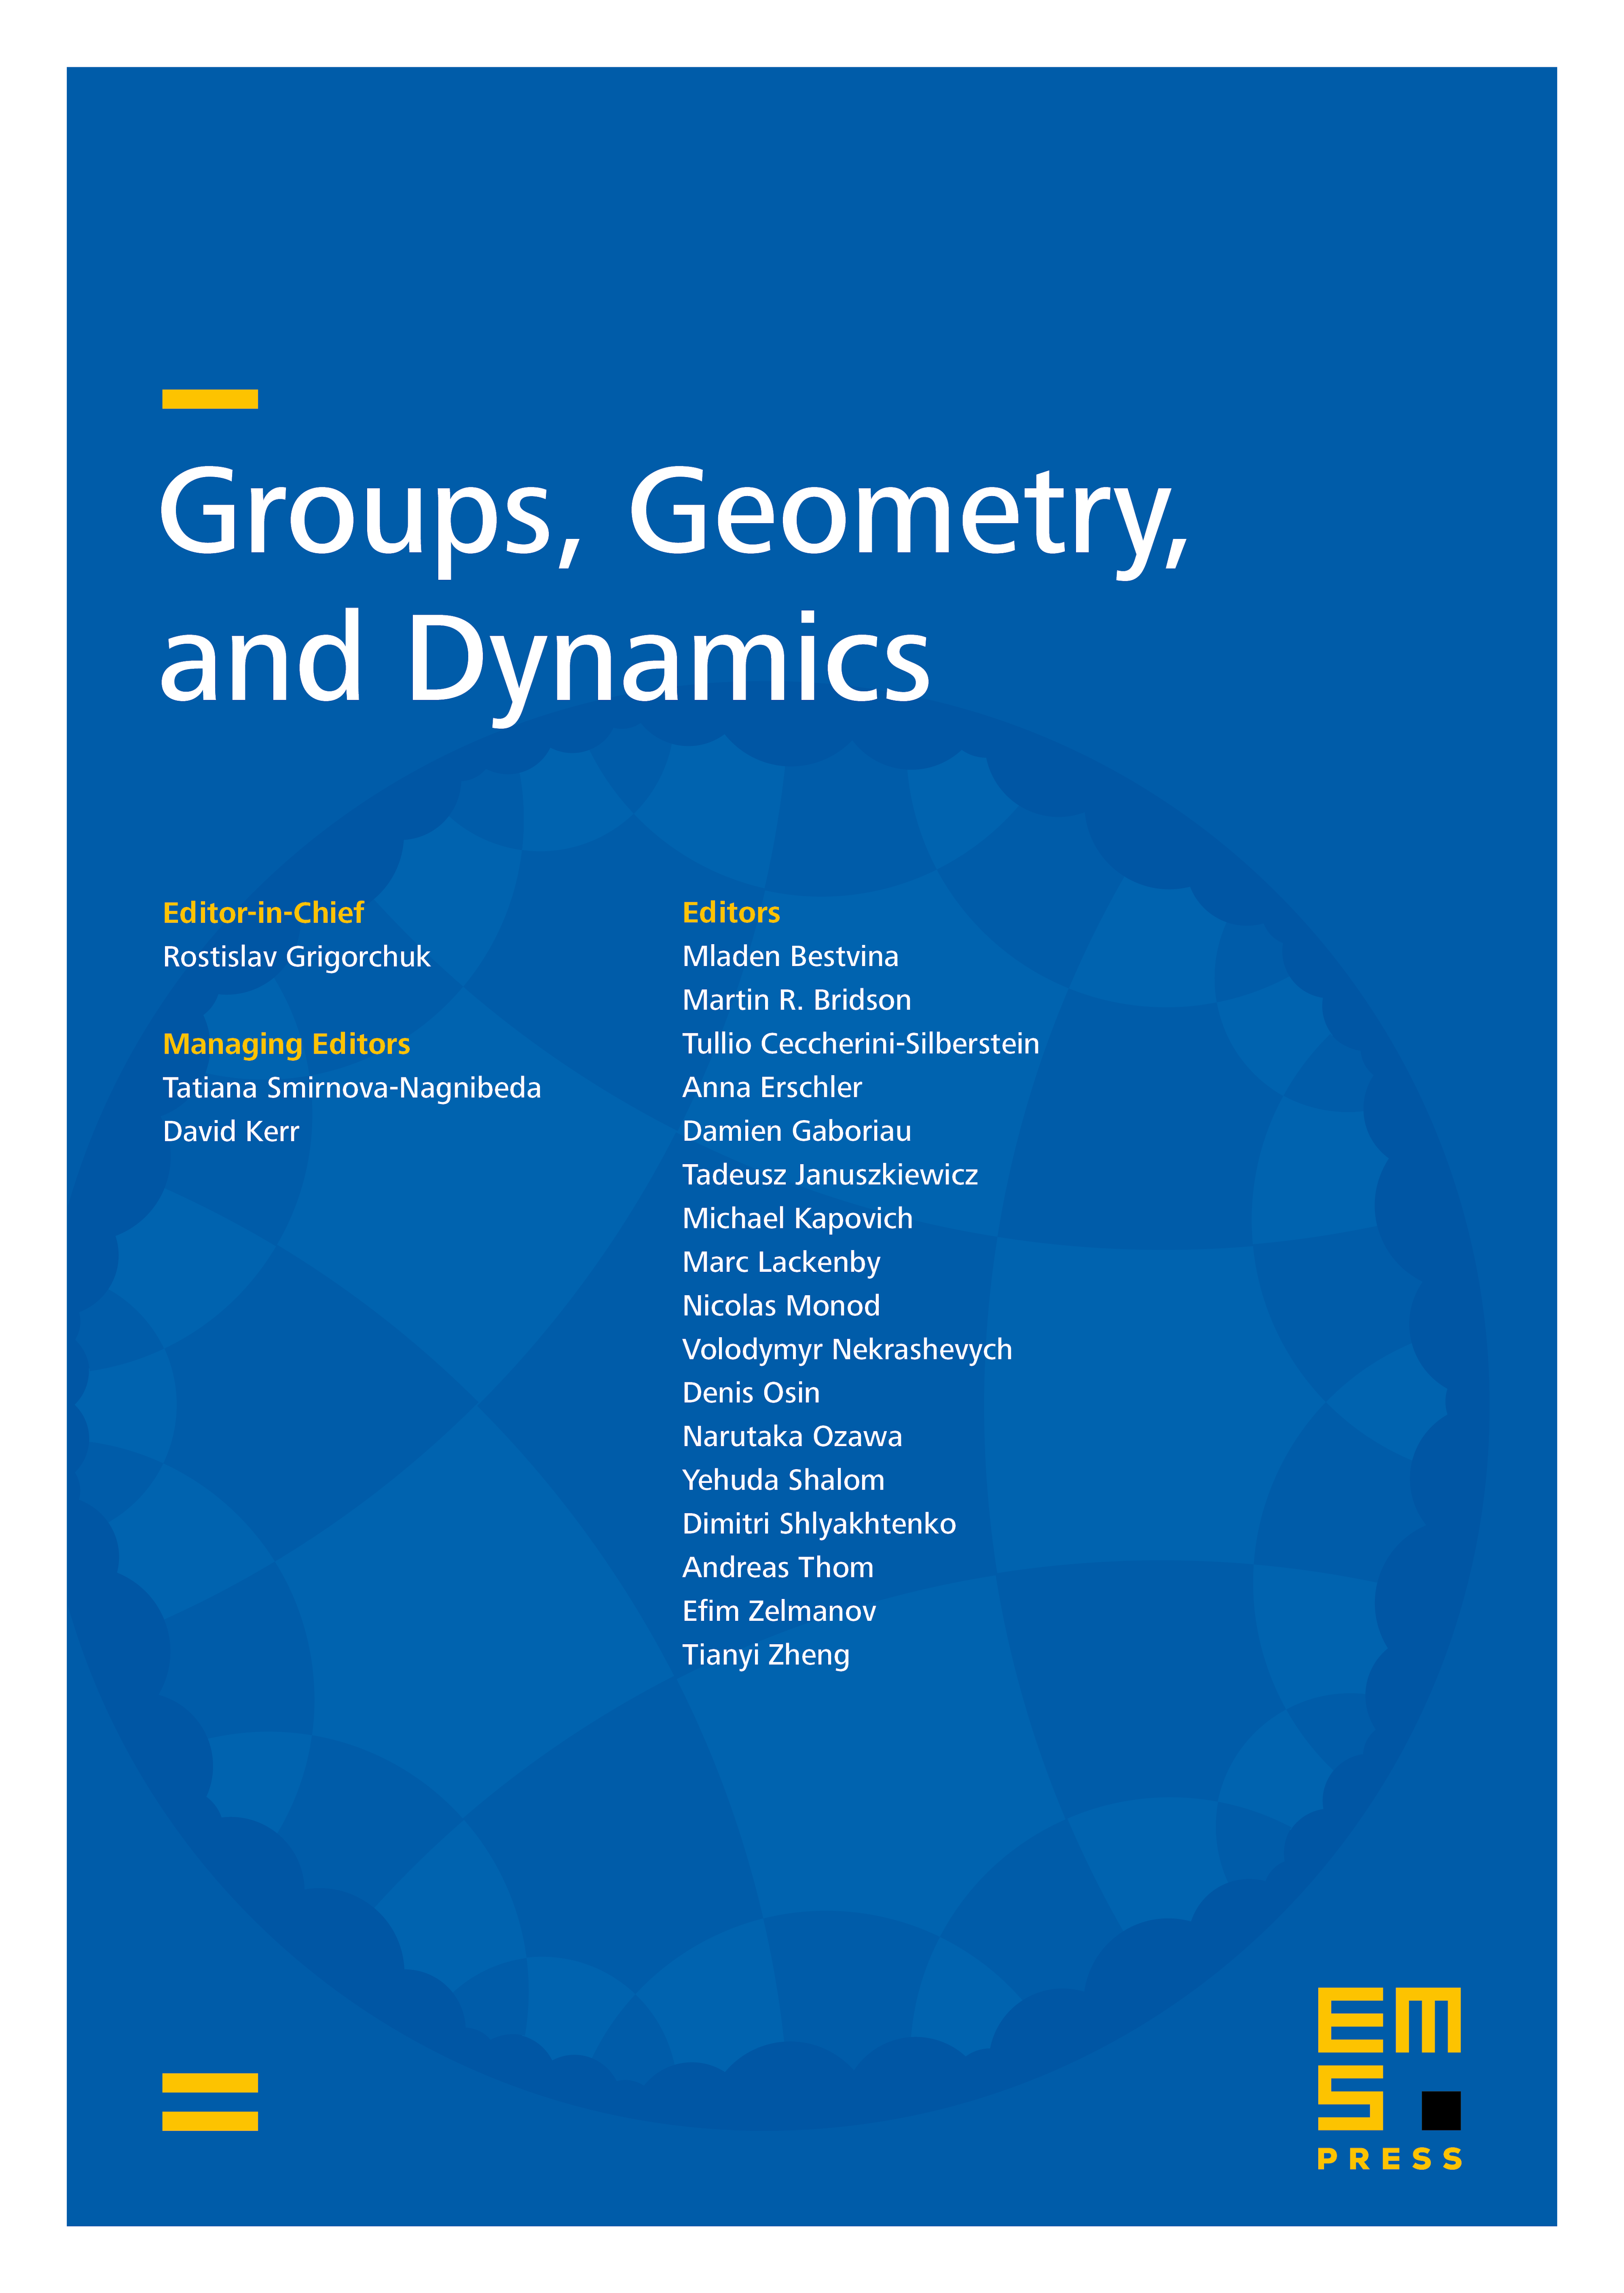 Small cancellation in acylindrically hyperbolic groups cover